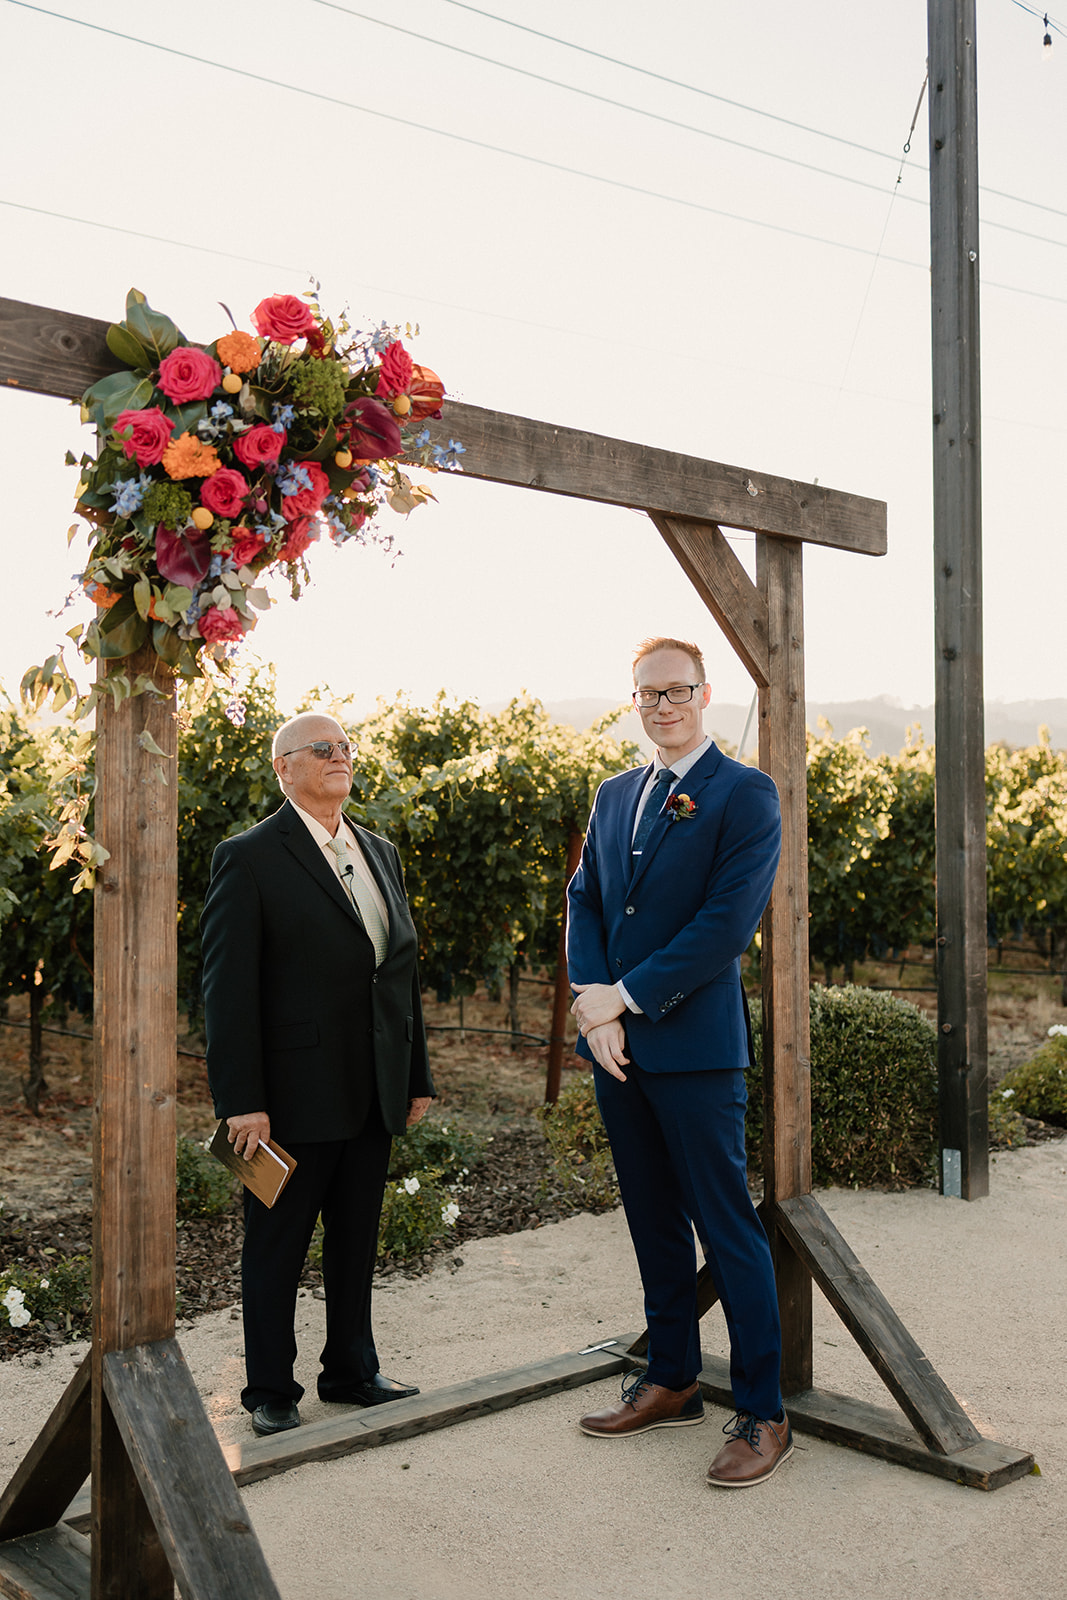 Two men in formal wear standing under a floral arch in a vineyard, one in a black suit and one in a blue suit, smiling gently.